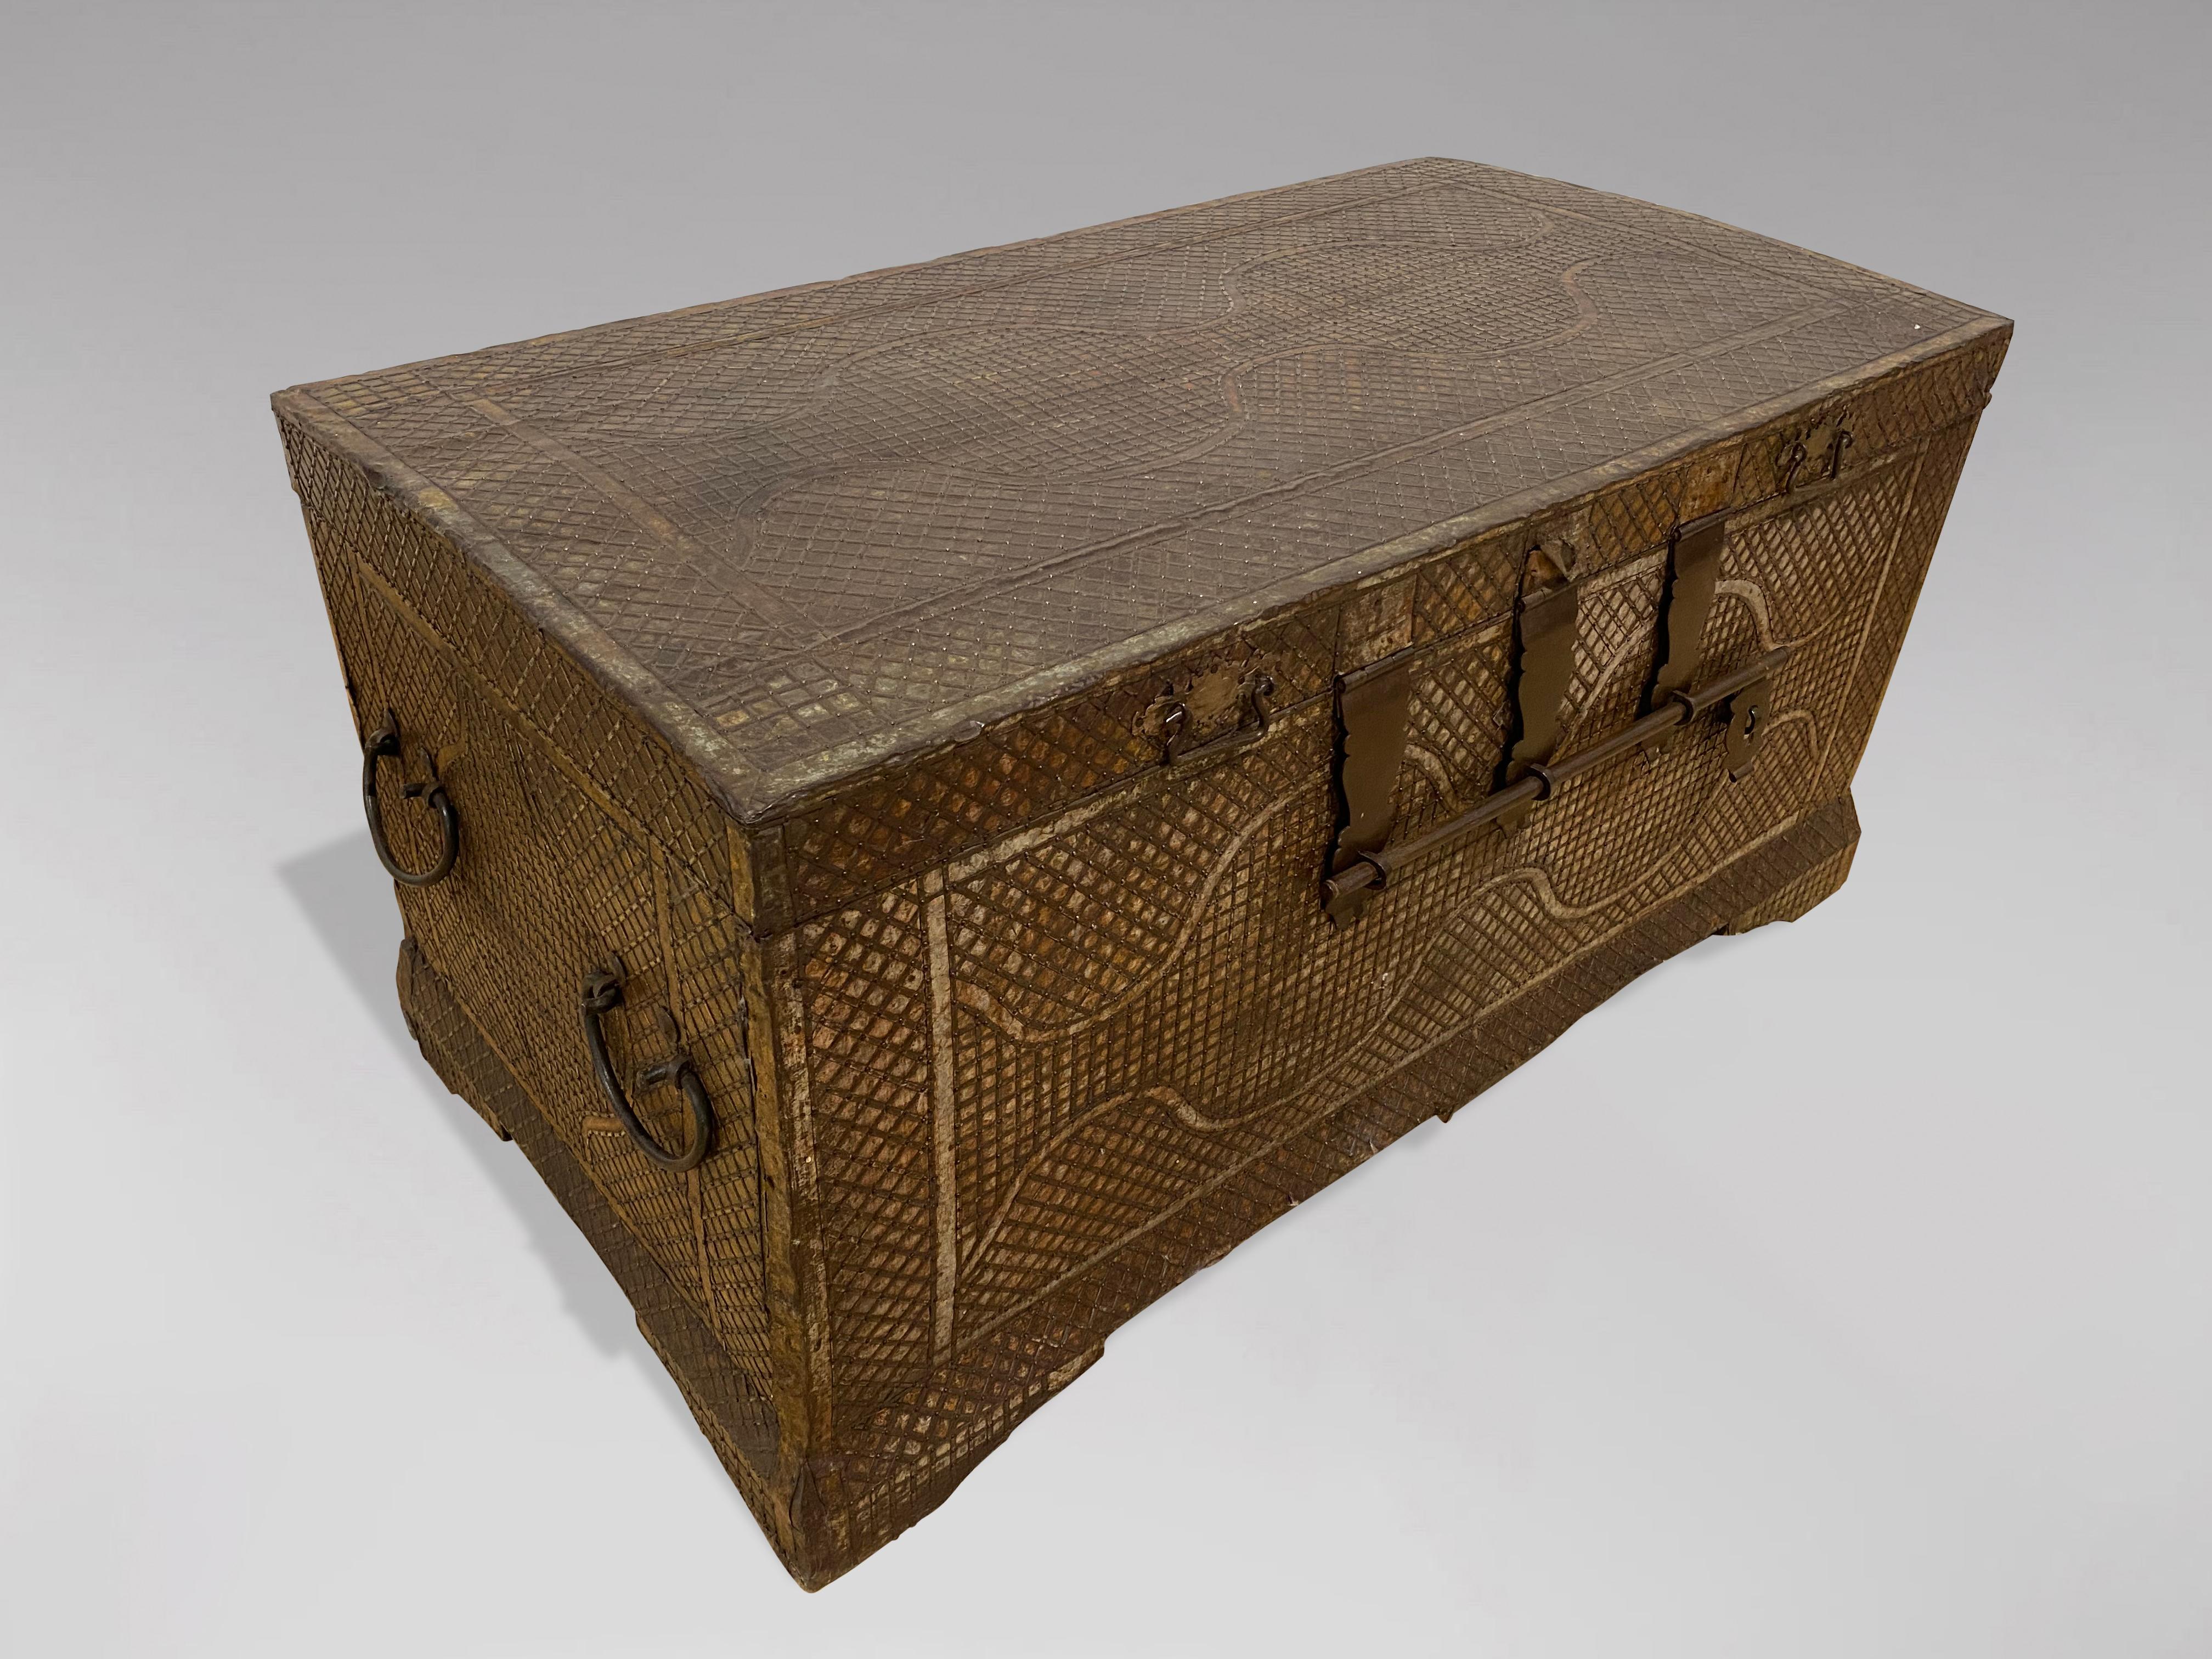 A late 19th century handcrafted colonial travelling chest or trunk with embossed metal overlay and mounts. The trunk comprises solid carved teak wood and features a hinged lid. The interior is in good clean condition. The chest is adorned with